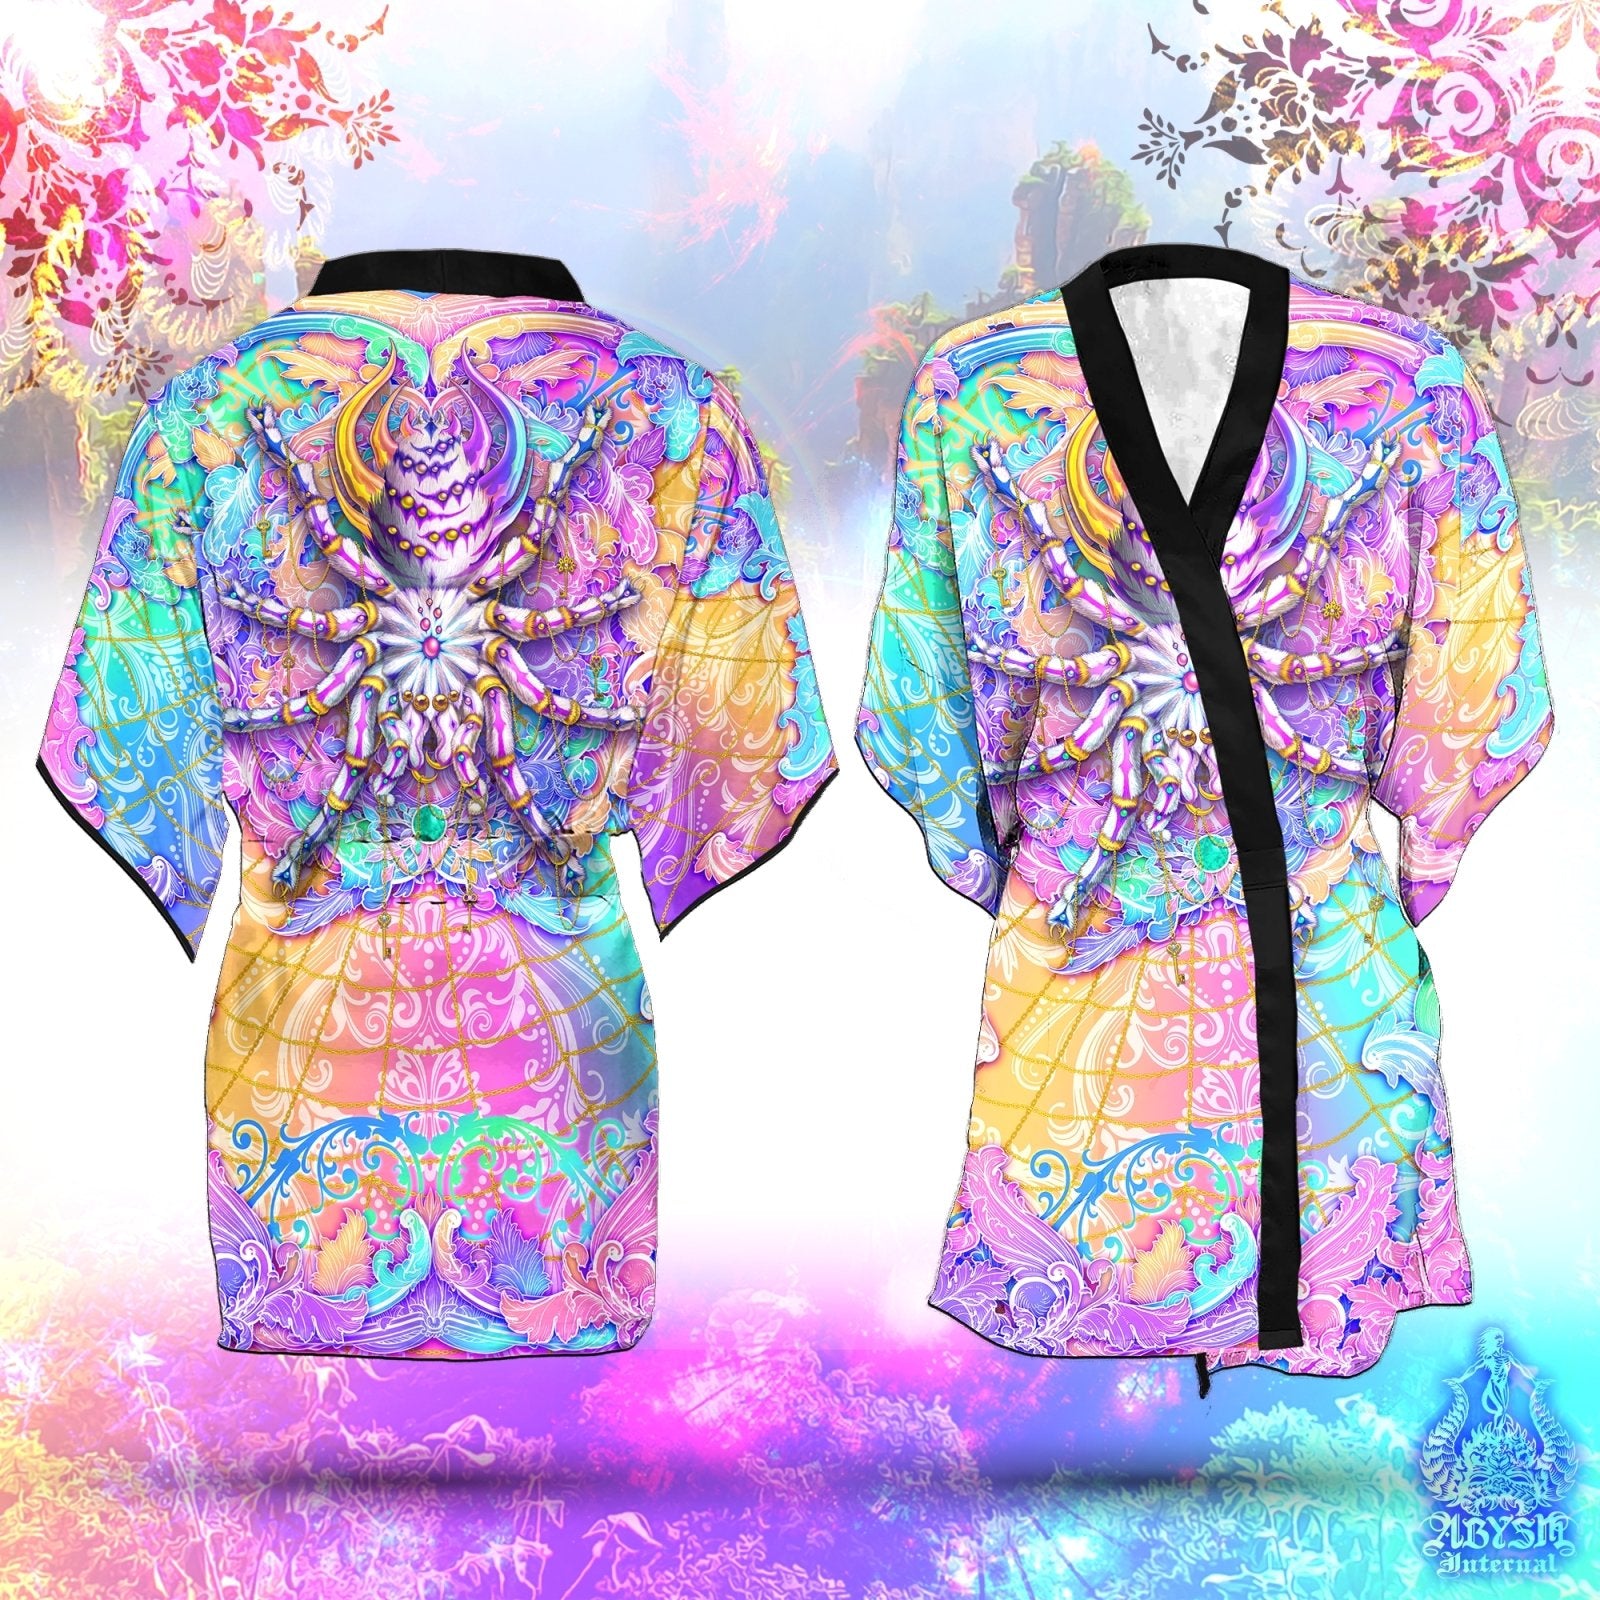 Aesthetic Cover Up, Psychedelic Beach Rave Outfit, Rave Party Kimono, Summer Festival Robe, Holographic Pastel Clothing, Unisex - Tarantula Spider - Abysm Internal